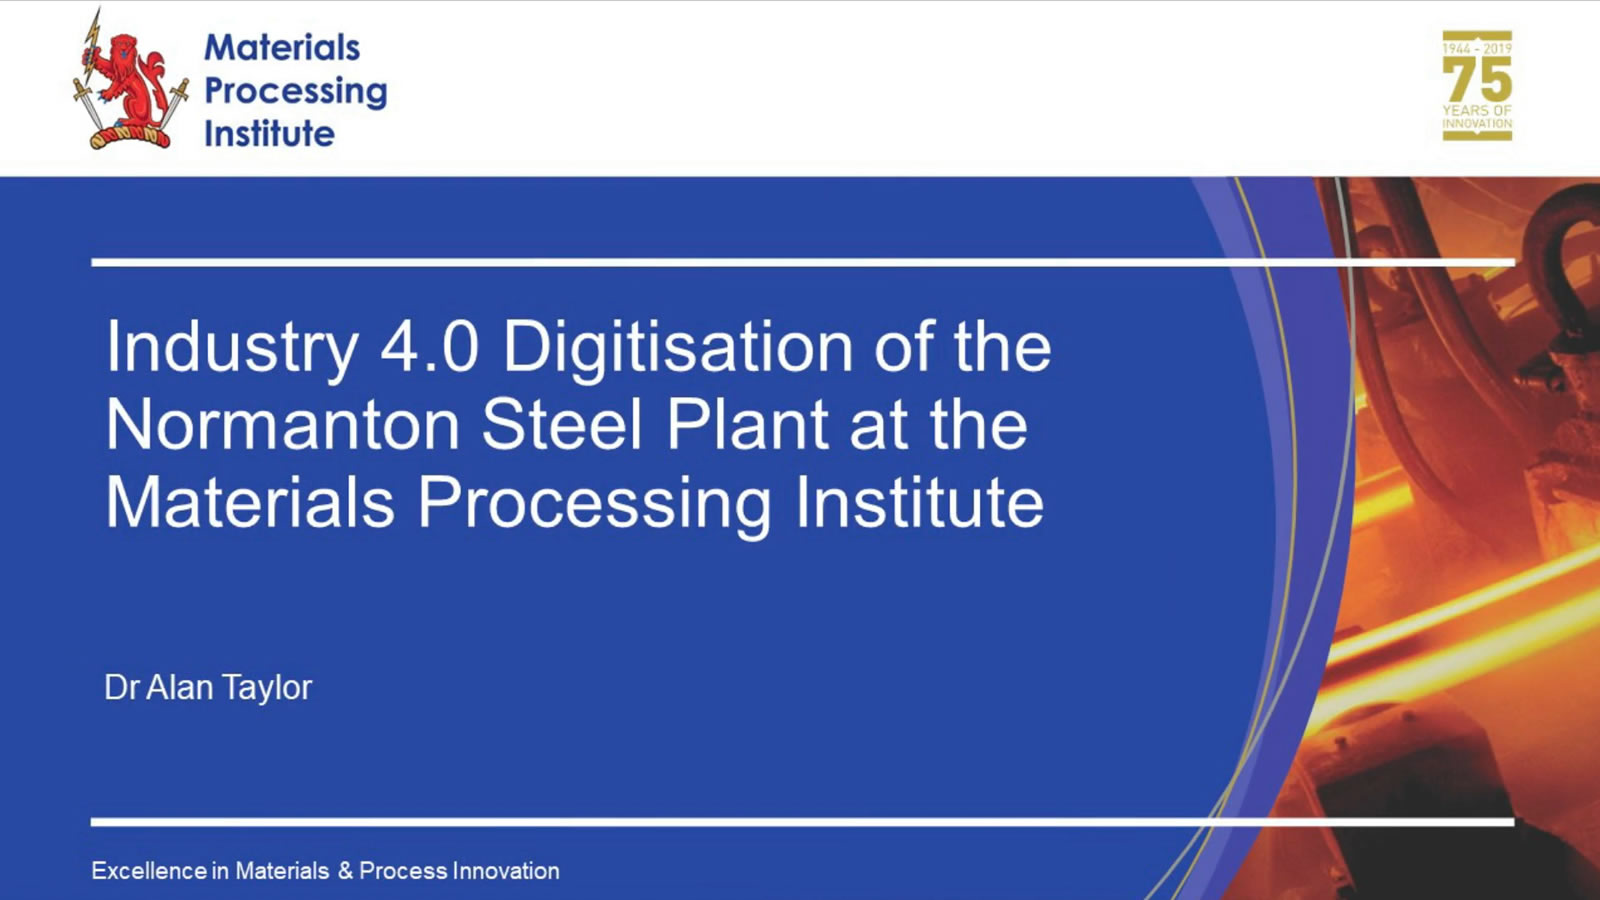 Industry 4.0 Digitisation of the Normanton Steel Plant at the Materials Processing Institute - Dr Alan Taylor